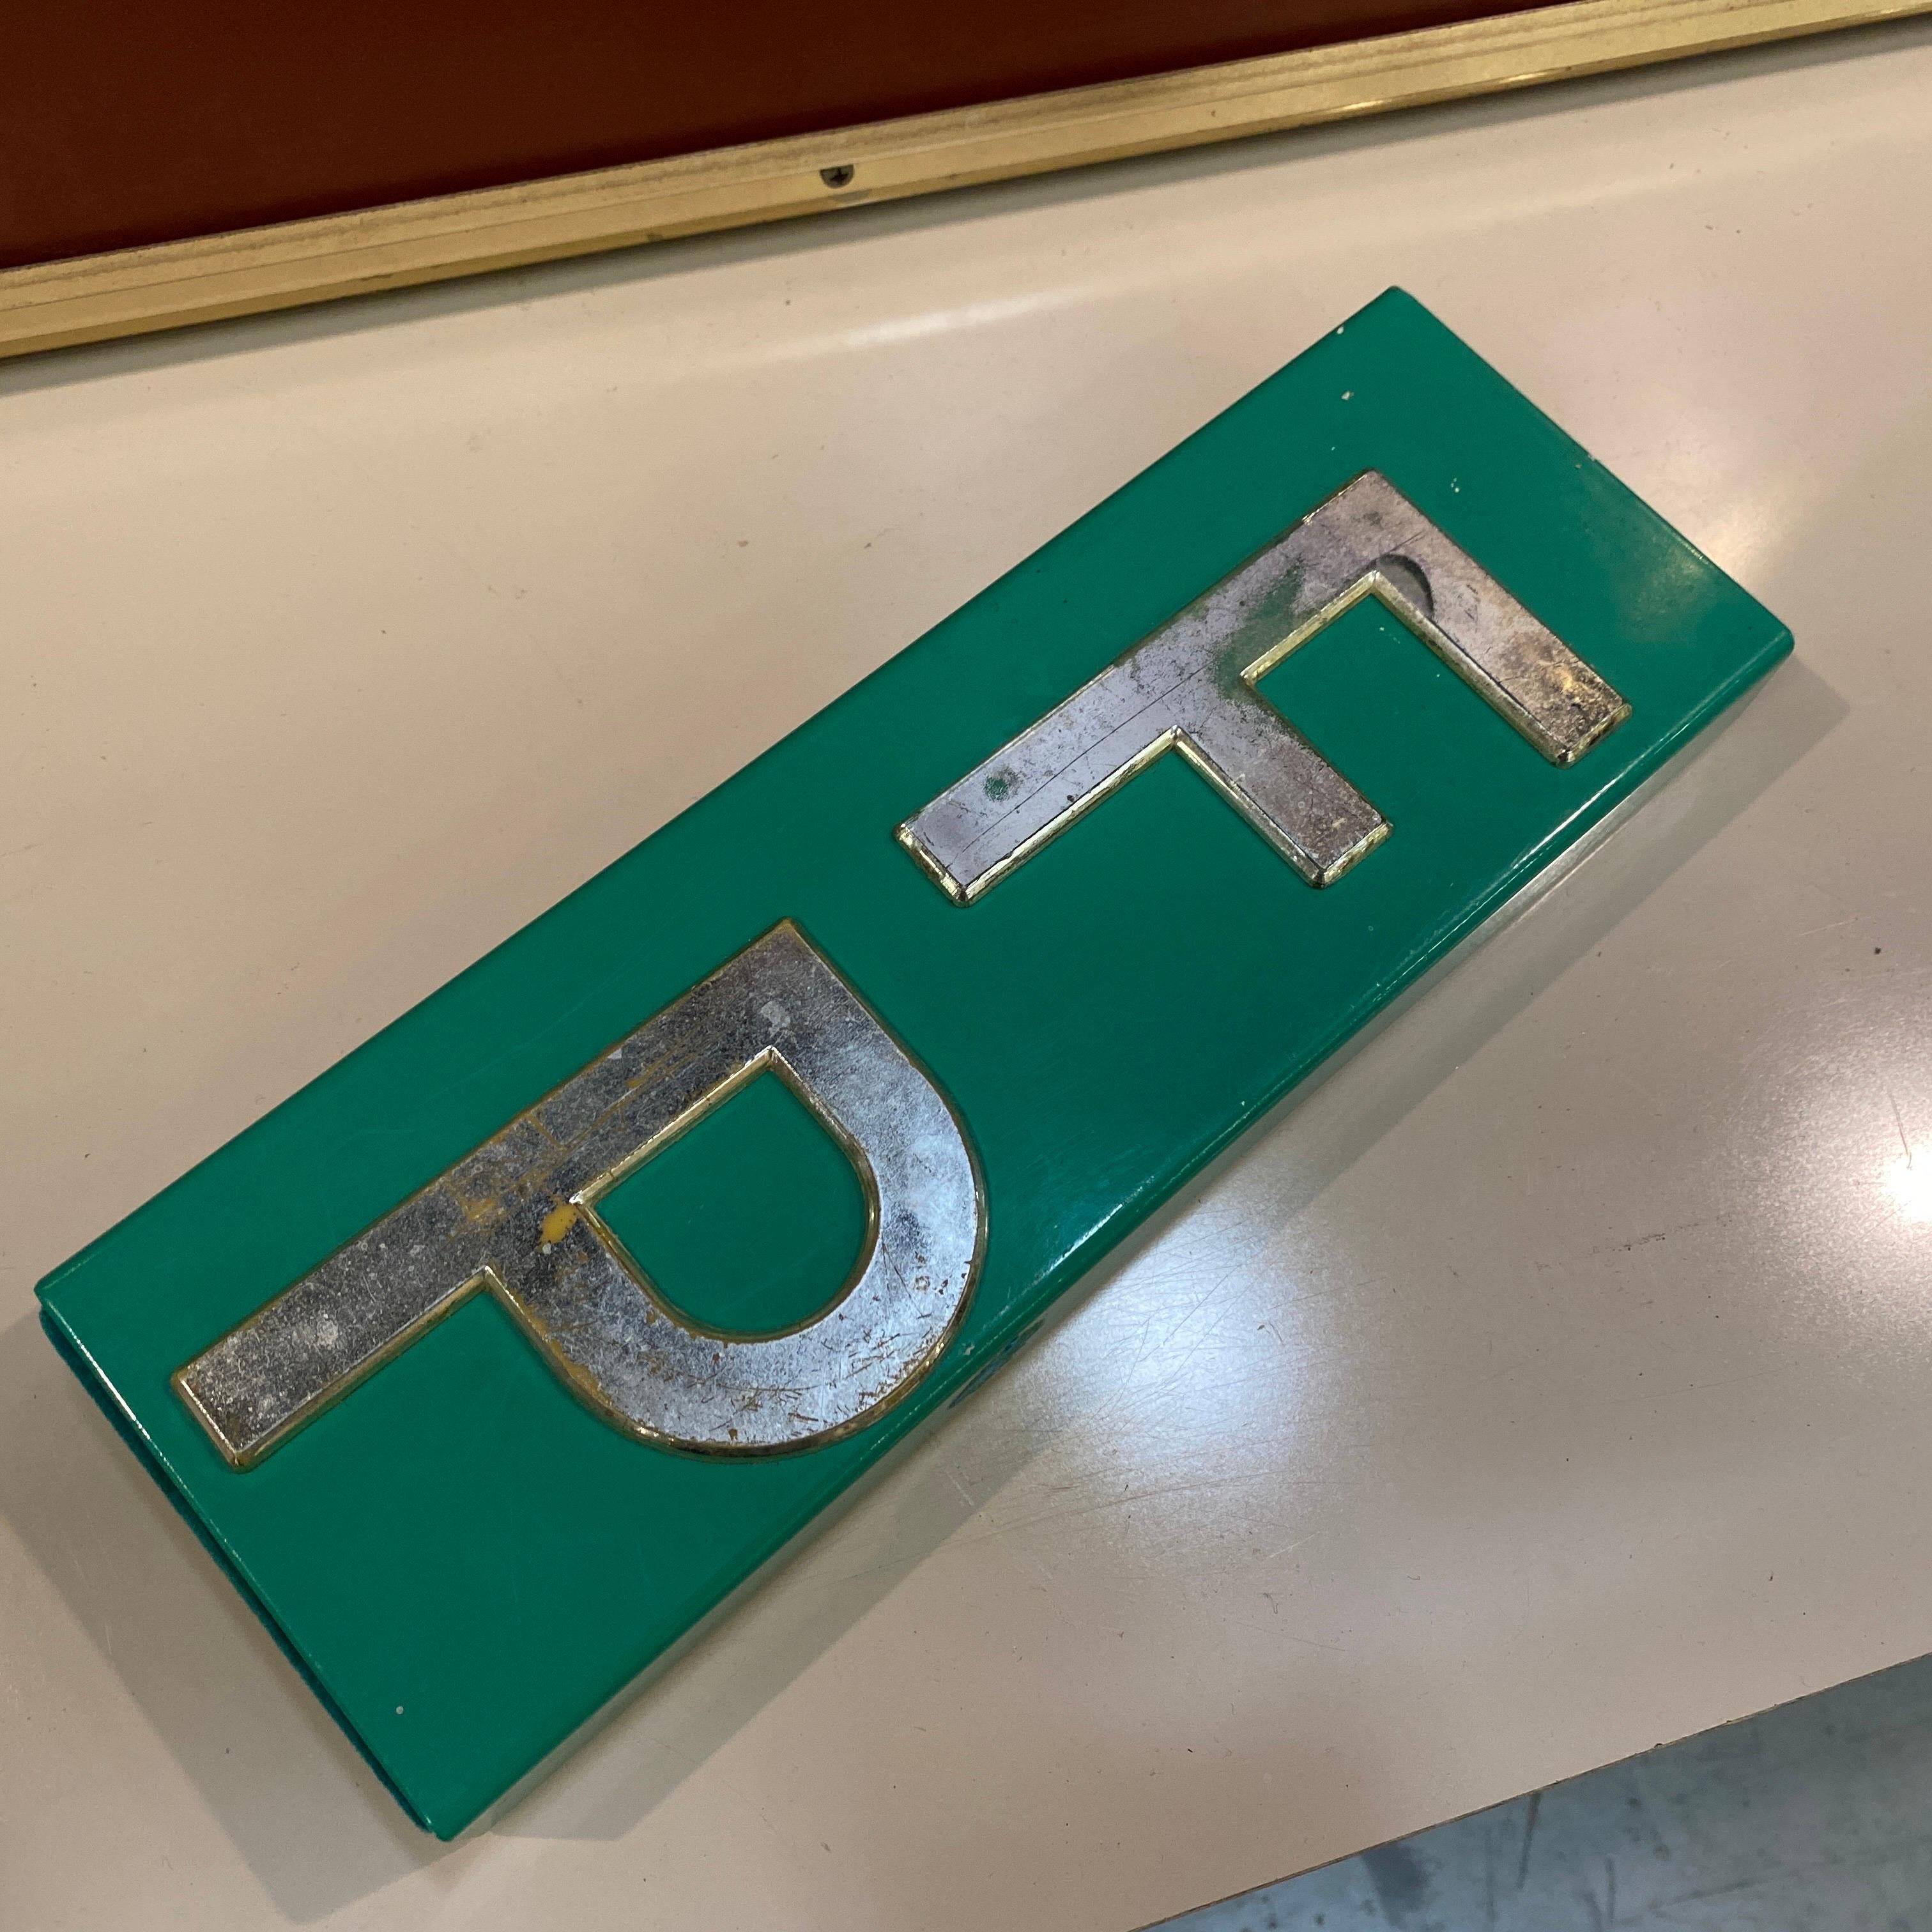 An extremely rare luxury box with Piero Fornasetti initials on the top, green sea velvet it's in good conditions, metal part it has normal signs of use and age. The box is one item of one of the most important italian designers of the Mid-20th